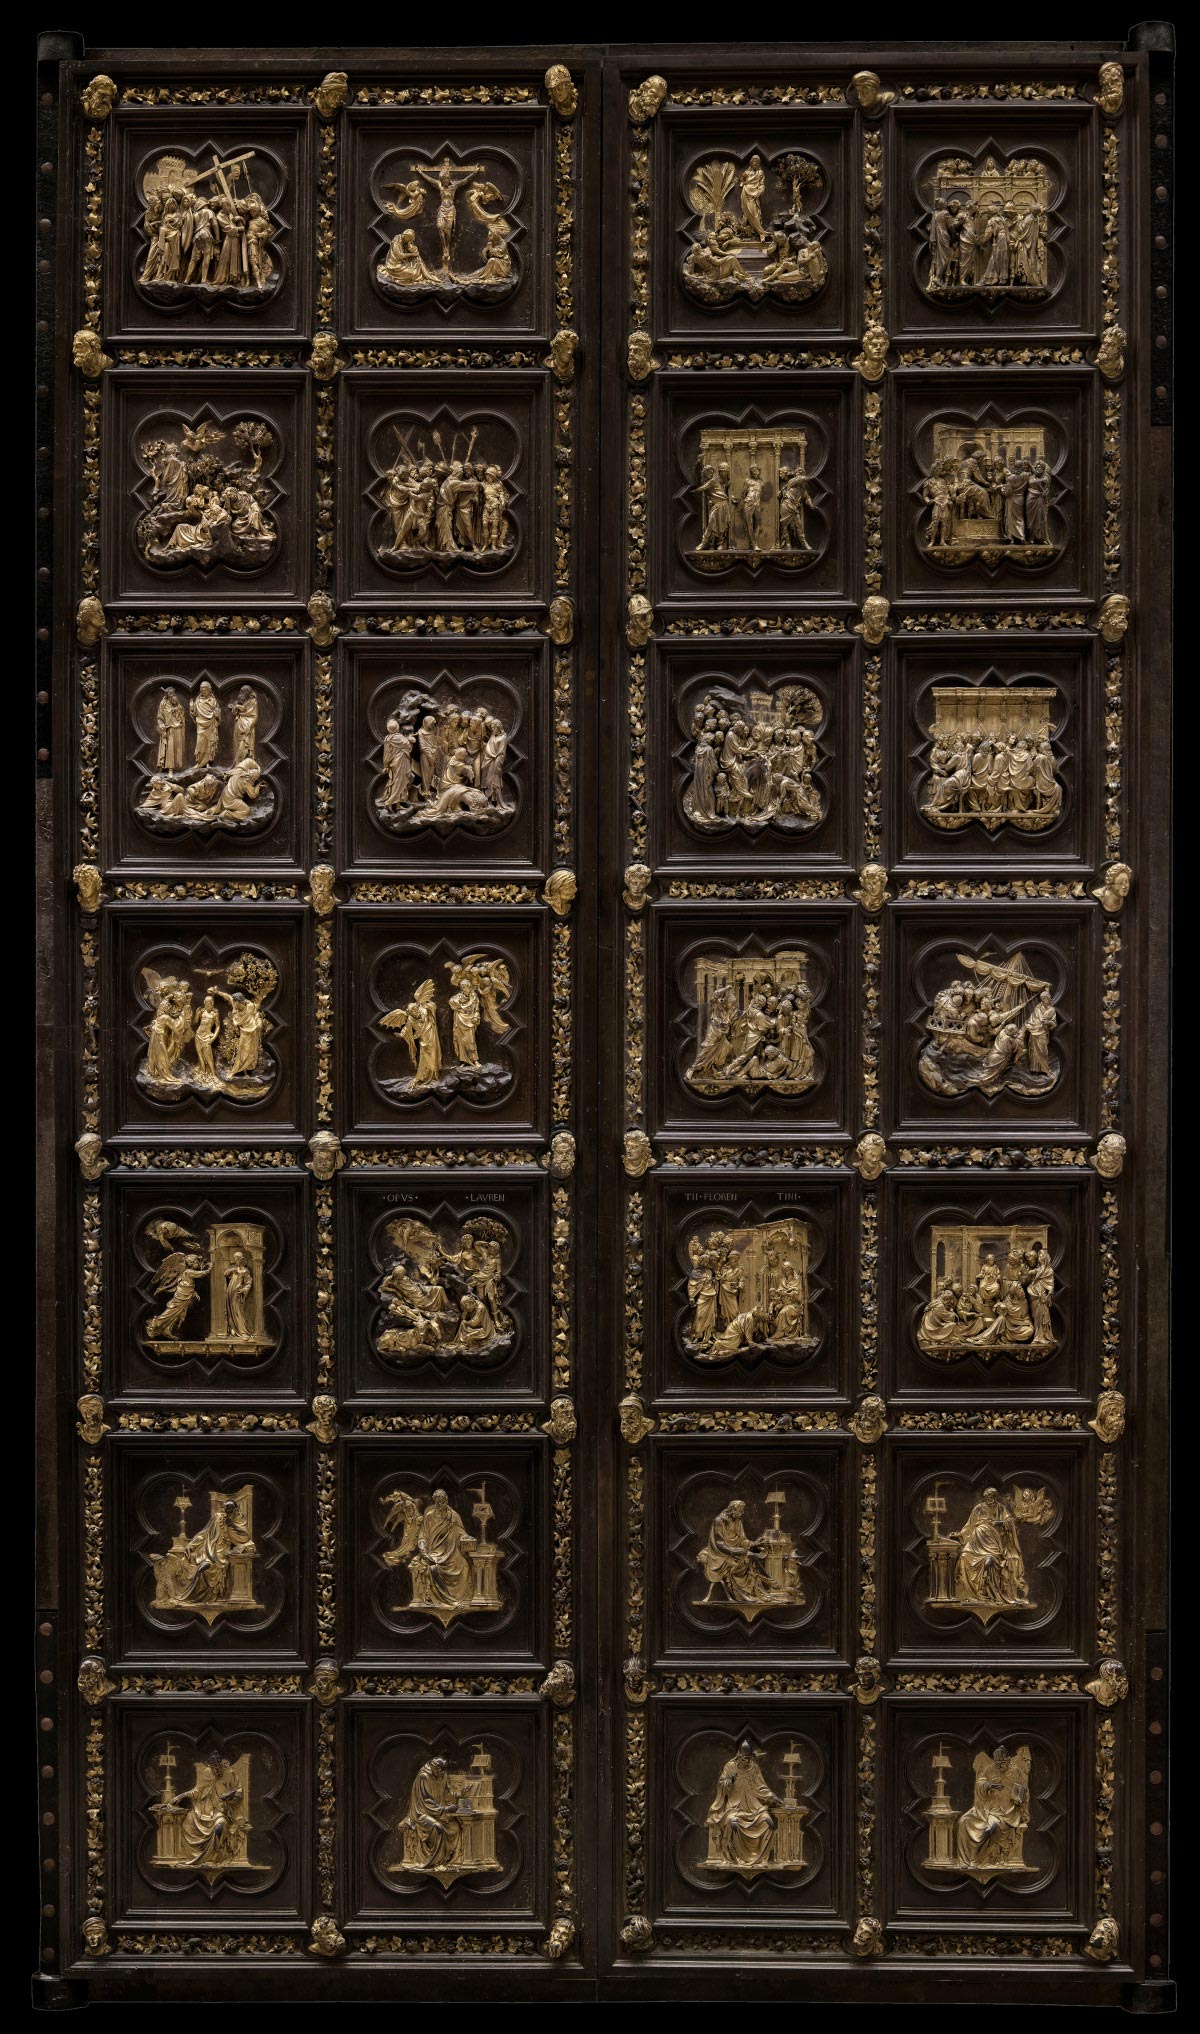 Lorenzo Ghiberti, North Door of the Baptistery of Florence (1403-1424; gilded bronze, 500 x 290 cm; Florence, Museo del Duomo)